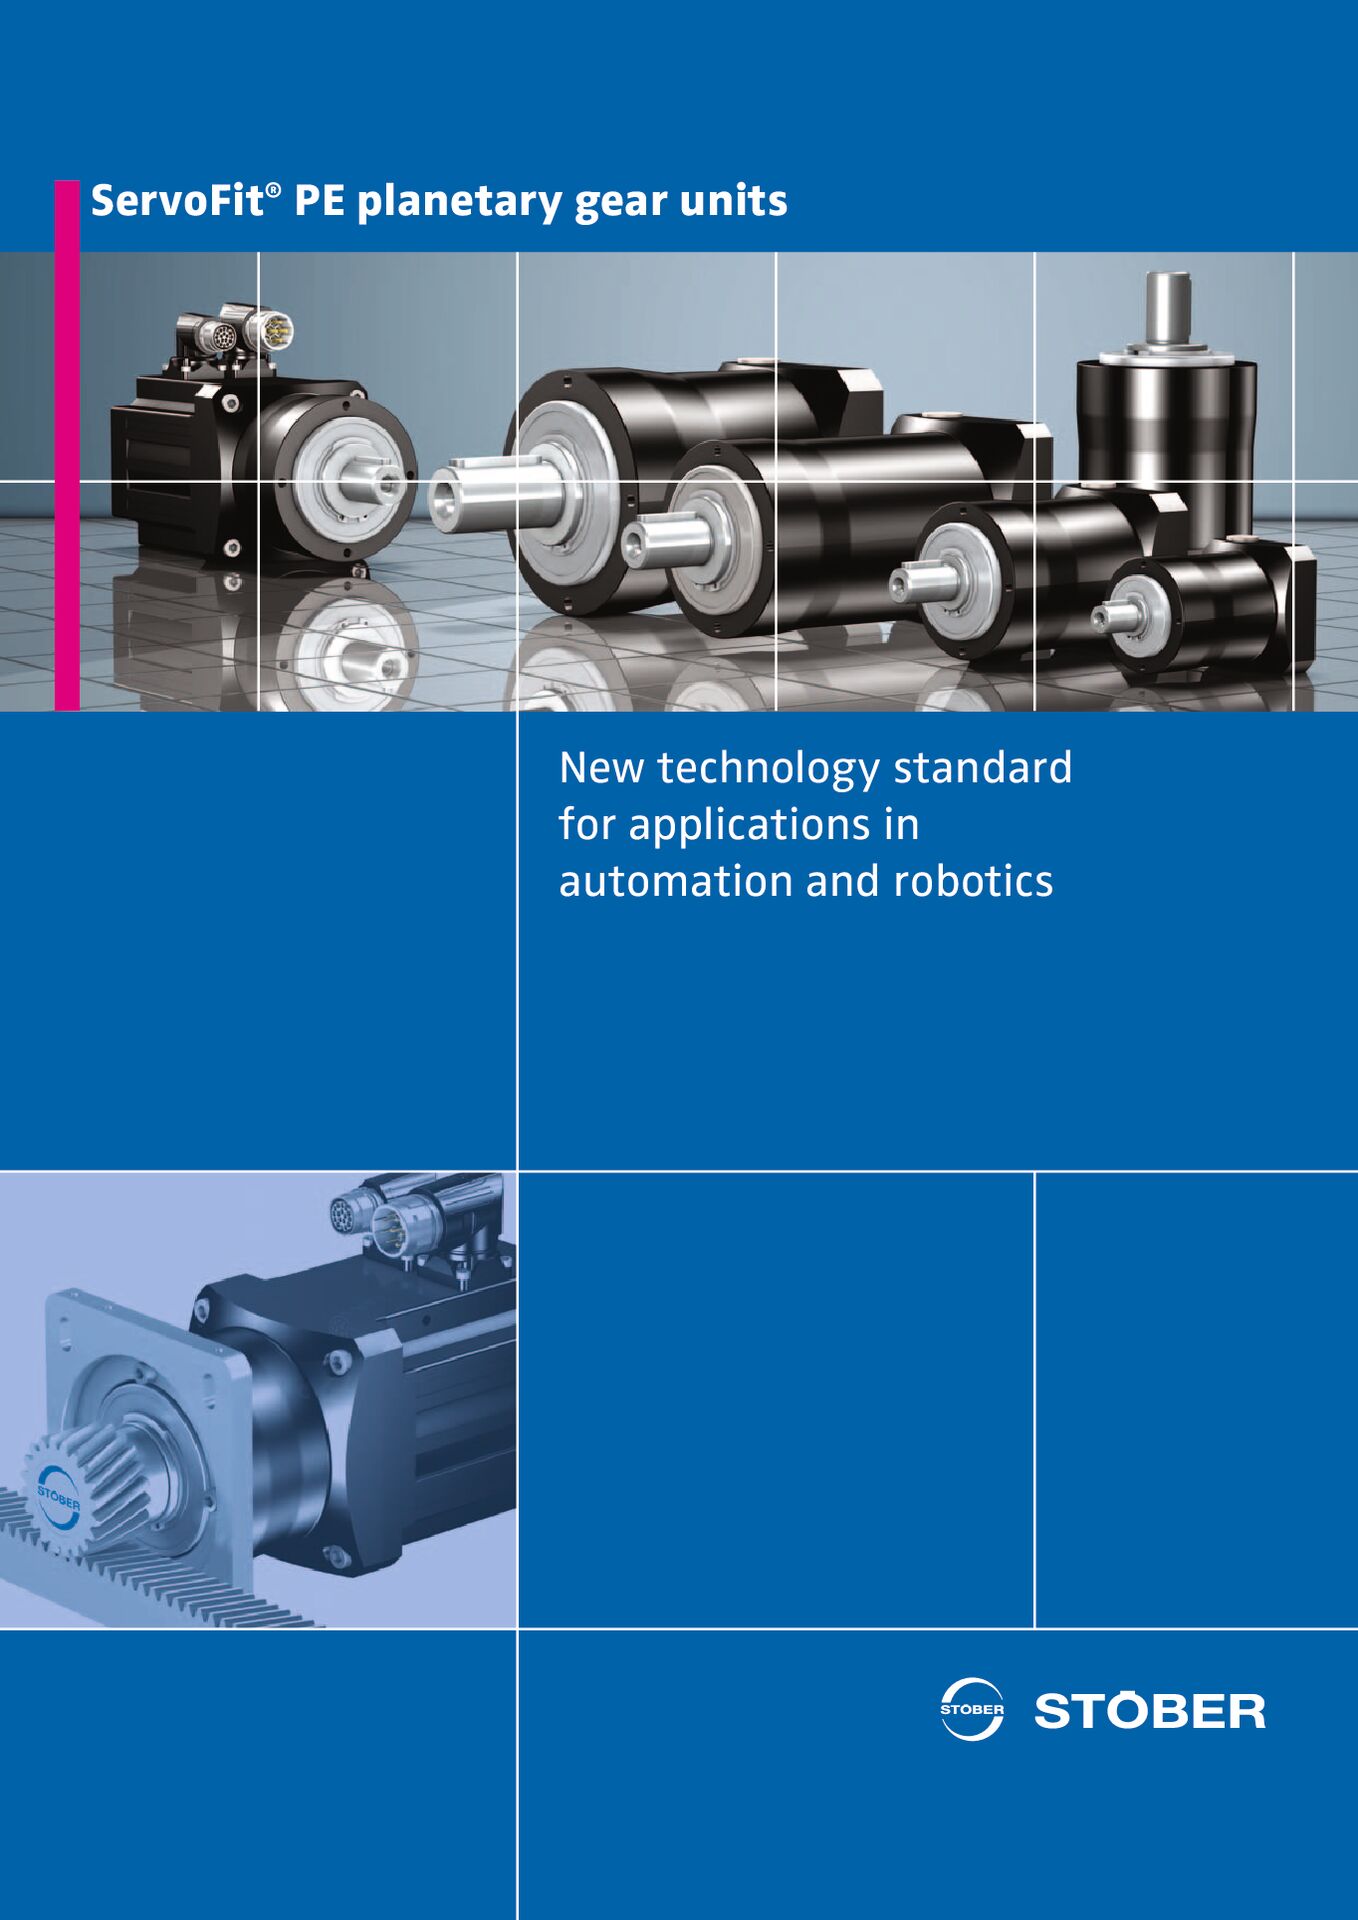 New technology standard for applications in automation and robotics